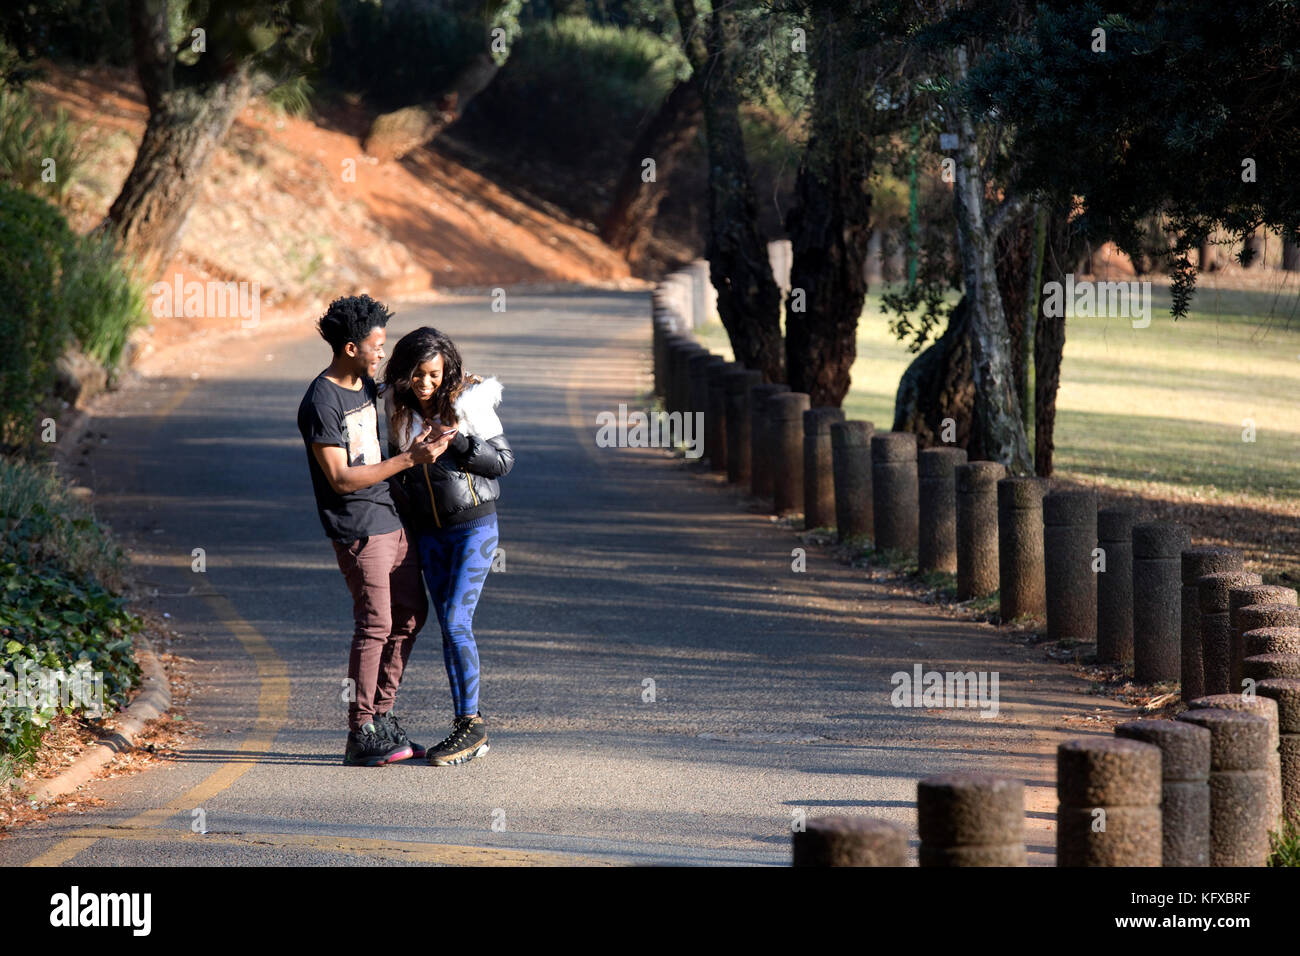 Couple looking at a cellphone whilst walking down a road Stock Photo